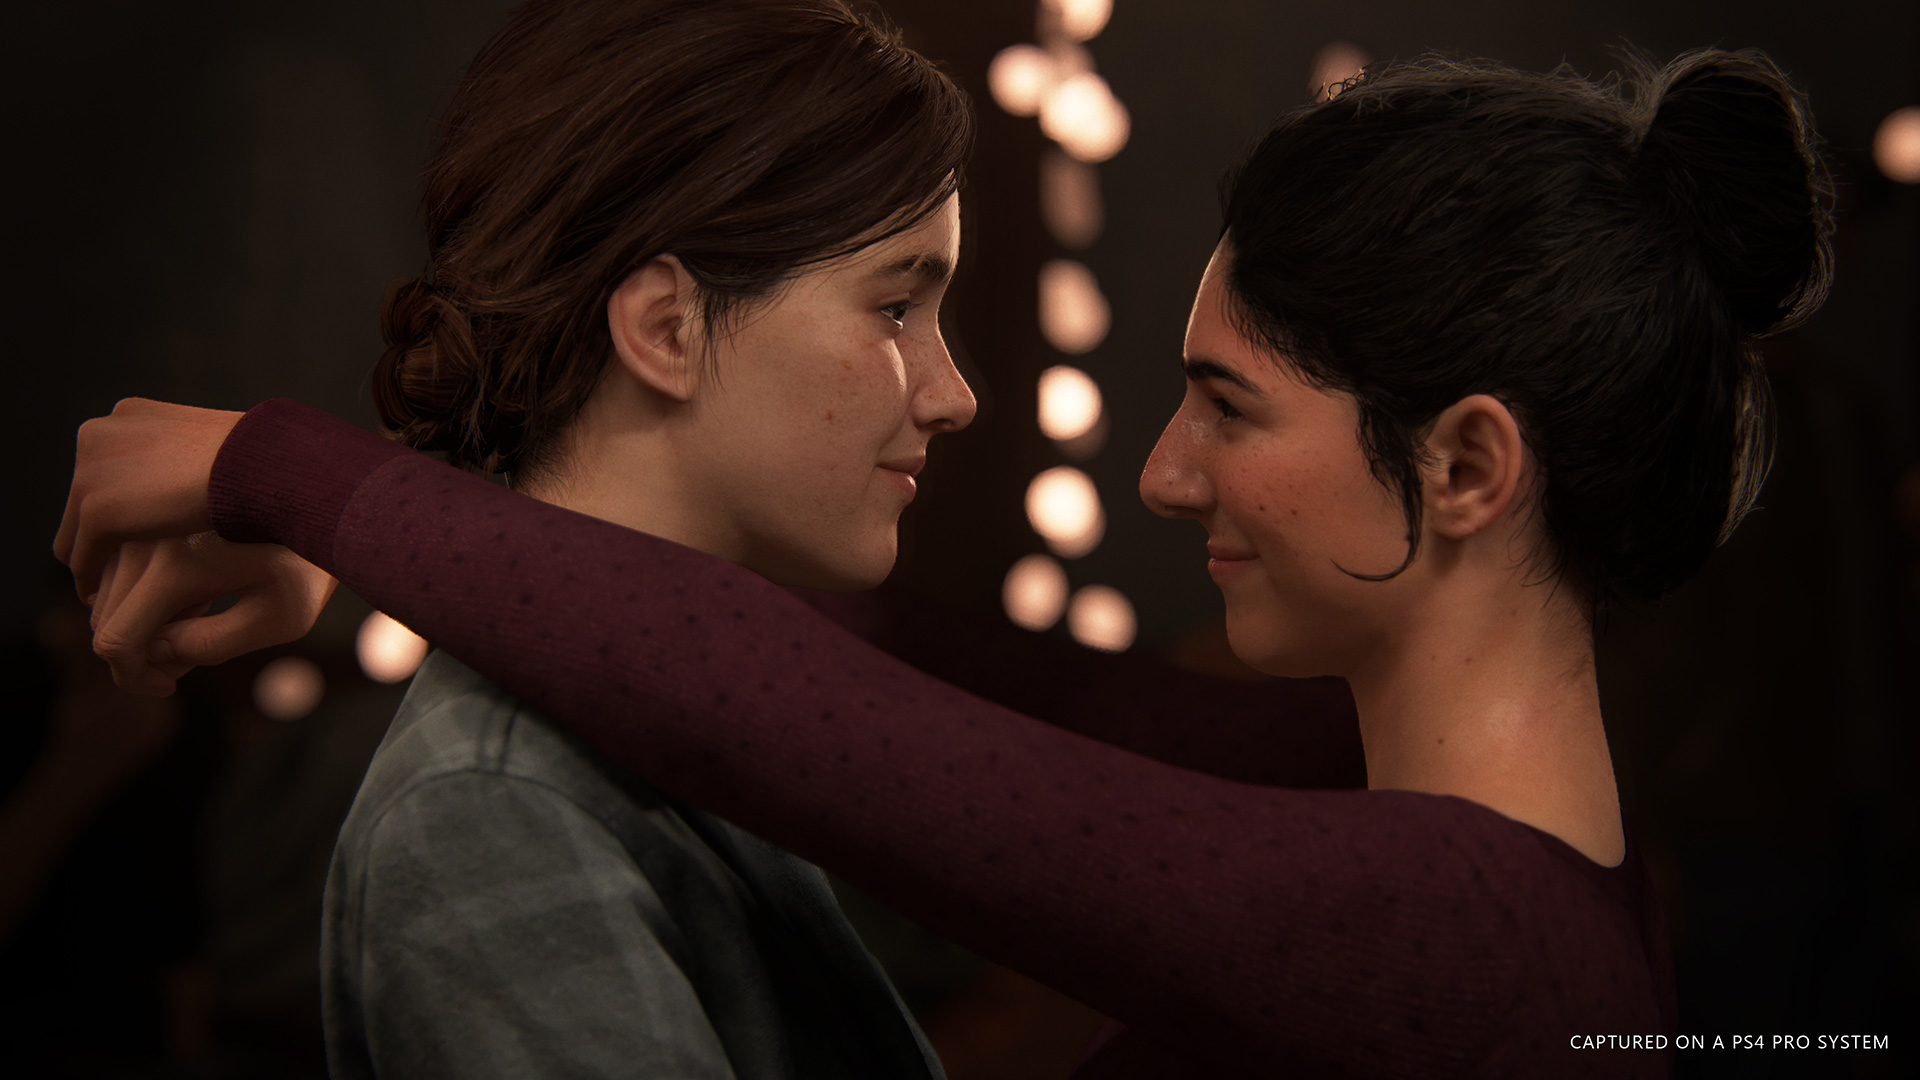 Why The Last of Us Part 1 Opening Is So Effective